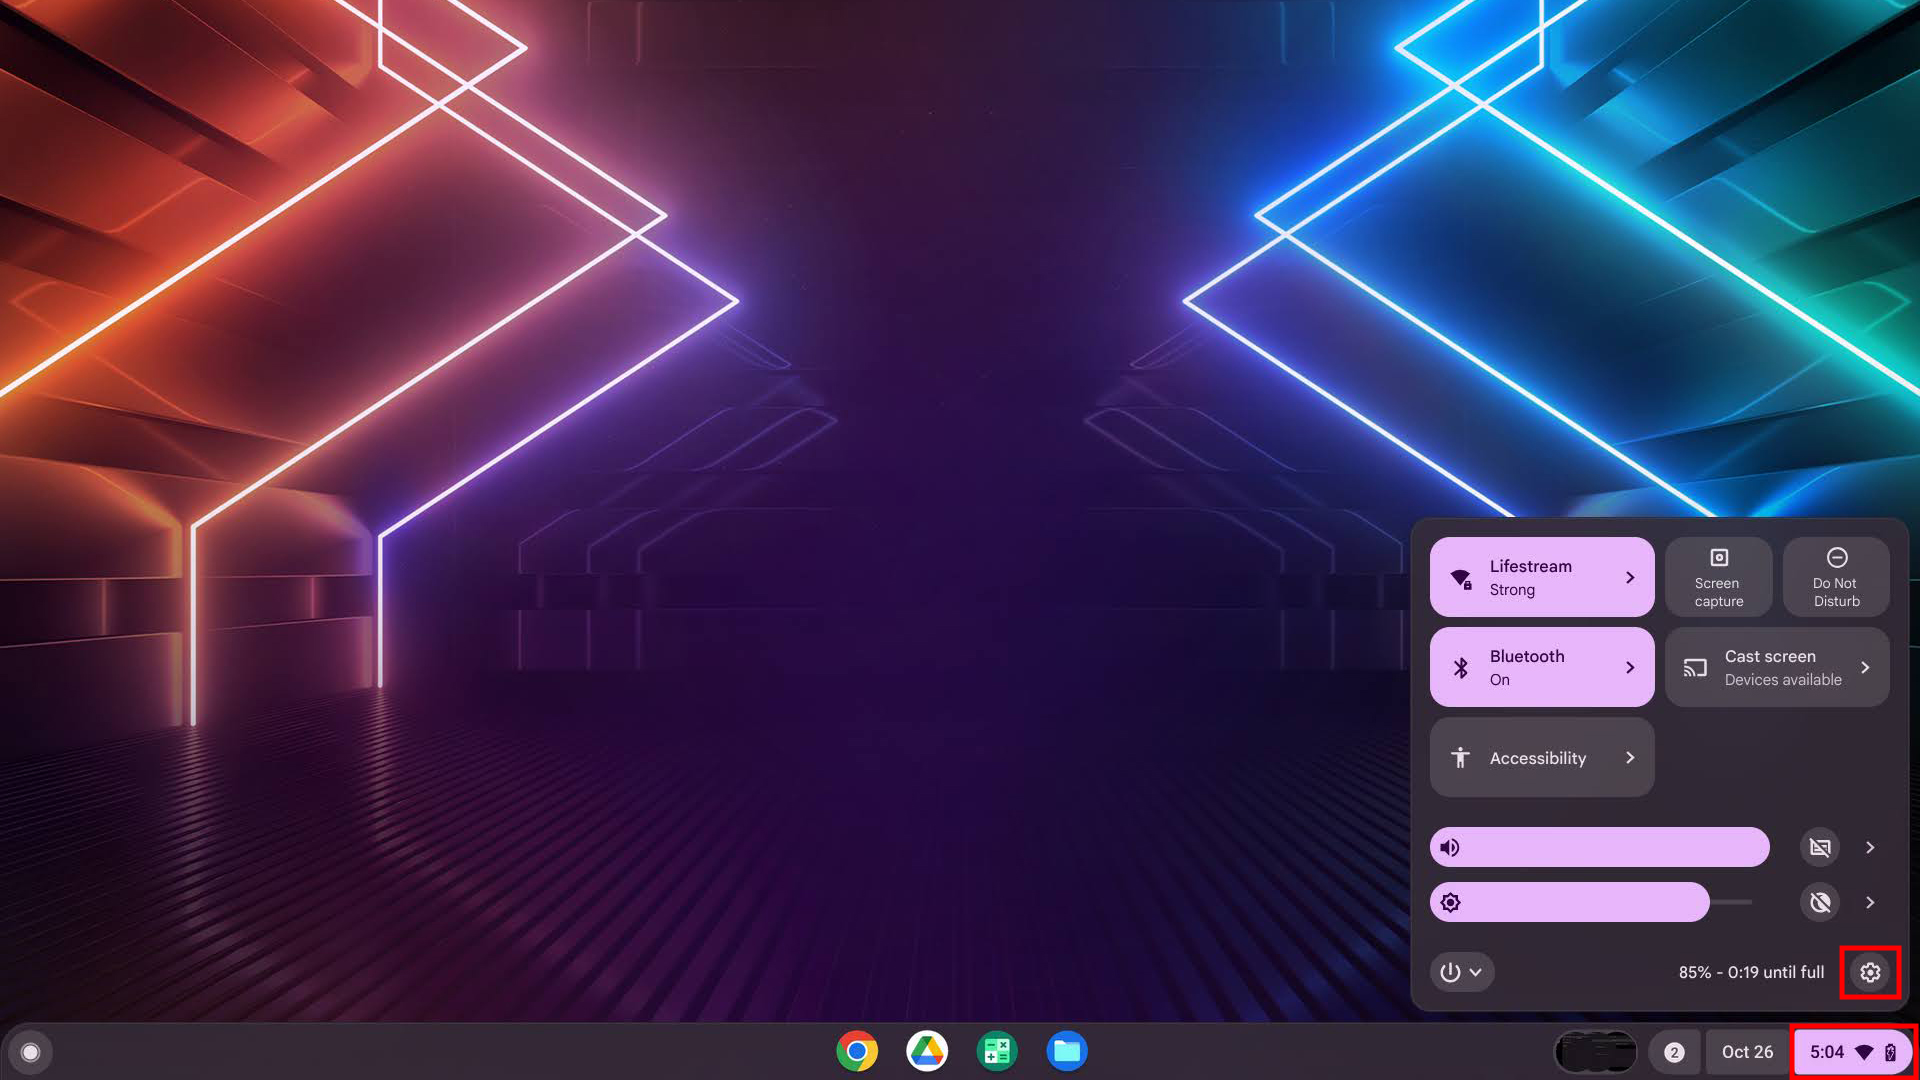 How to get beautiful new wallpapers on your Chromebook every day